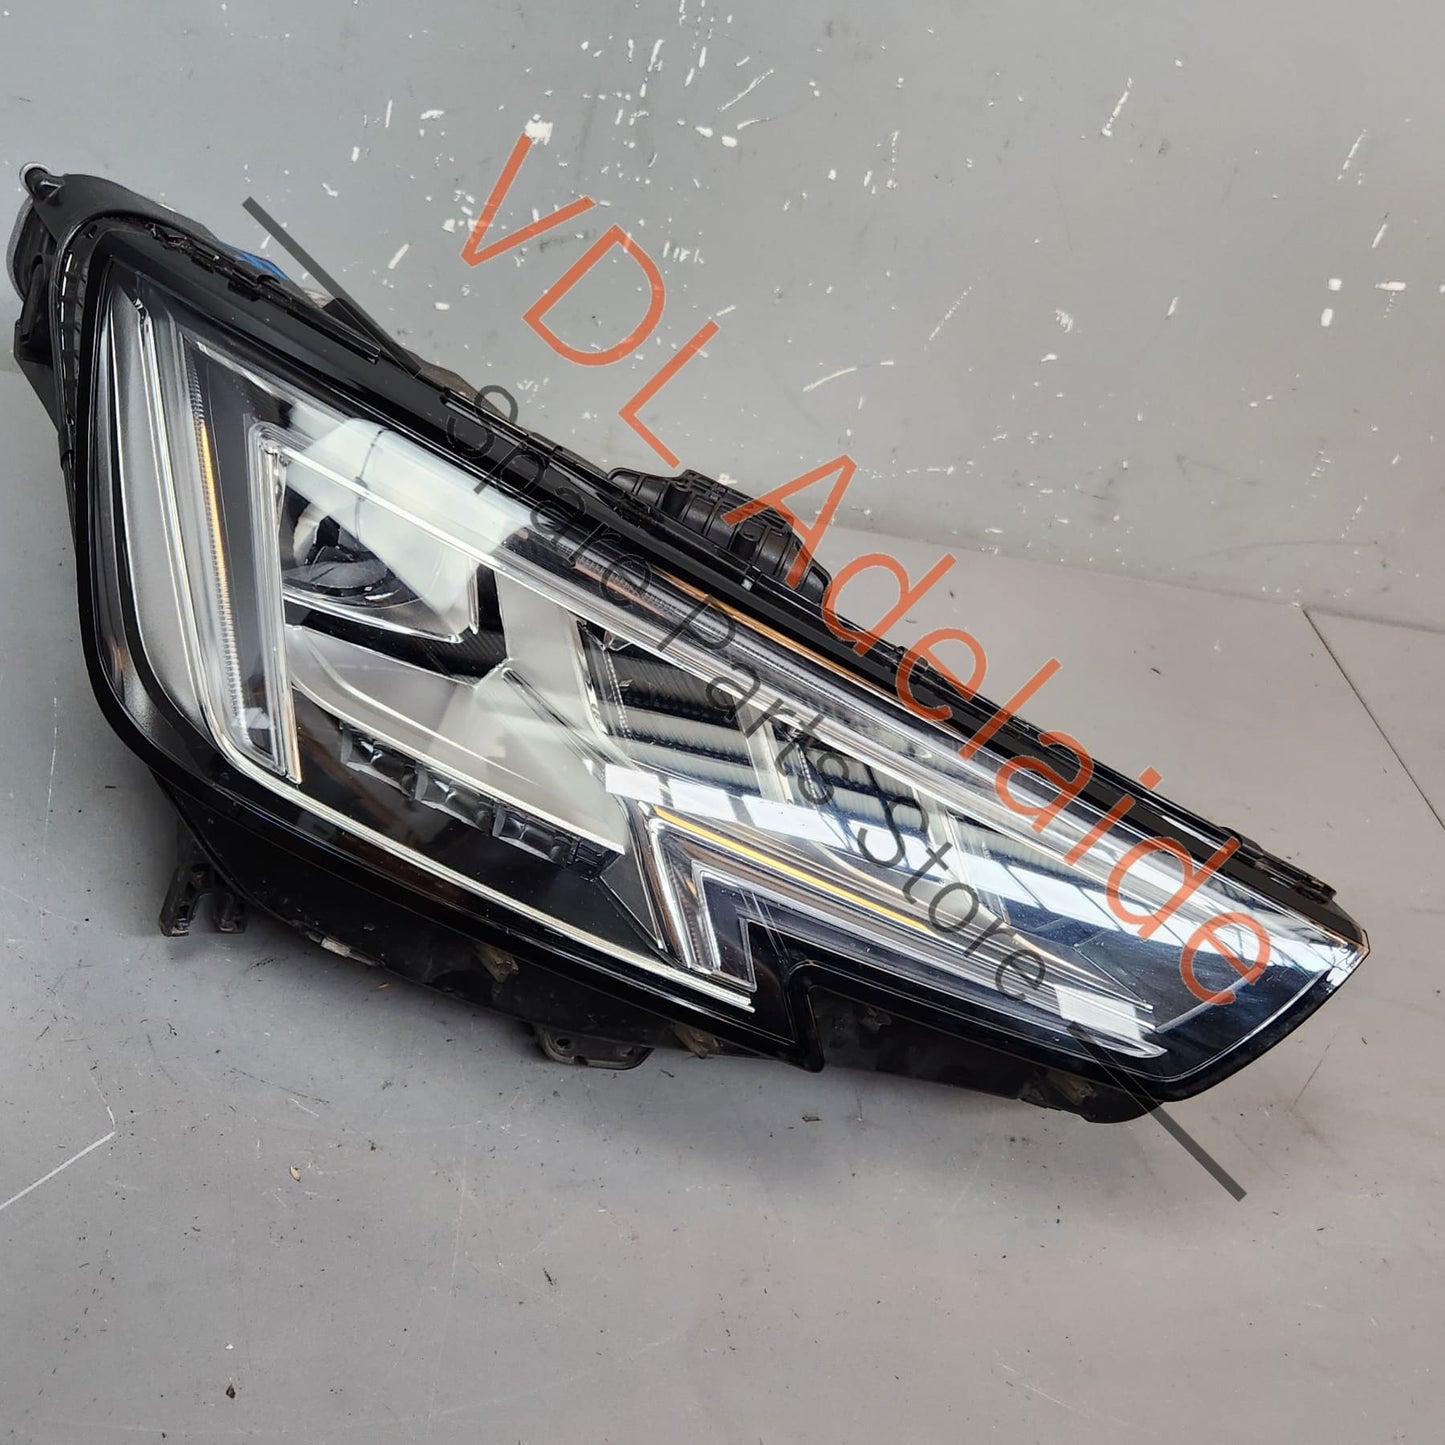 8W0941784A 8W0941036A 7PP941571BC Audi S4 A4 B9 LED Headlight with Matrix Beam Right for RHD Models 8W0941036A 8W0941784A 7PP941571BC 4M0907397AD